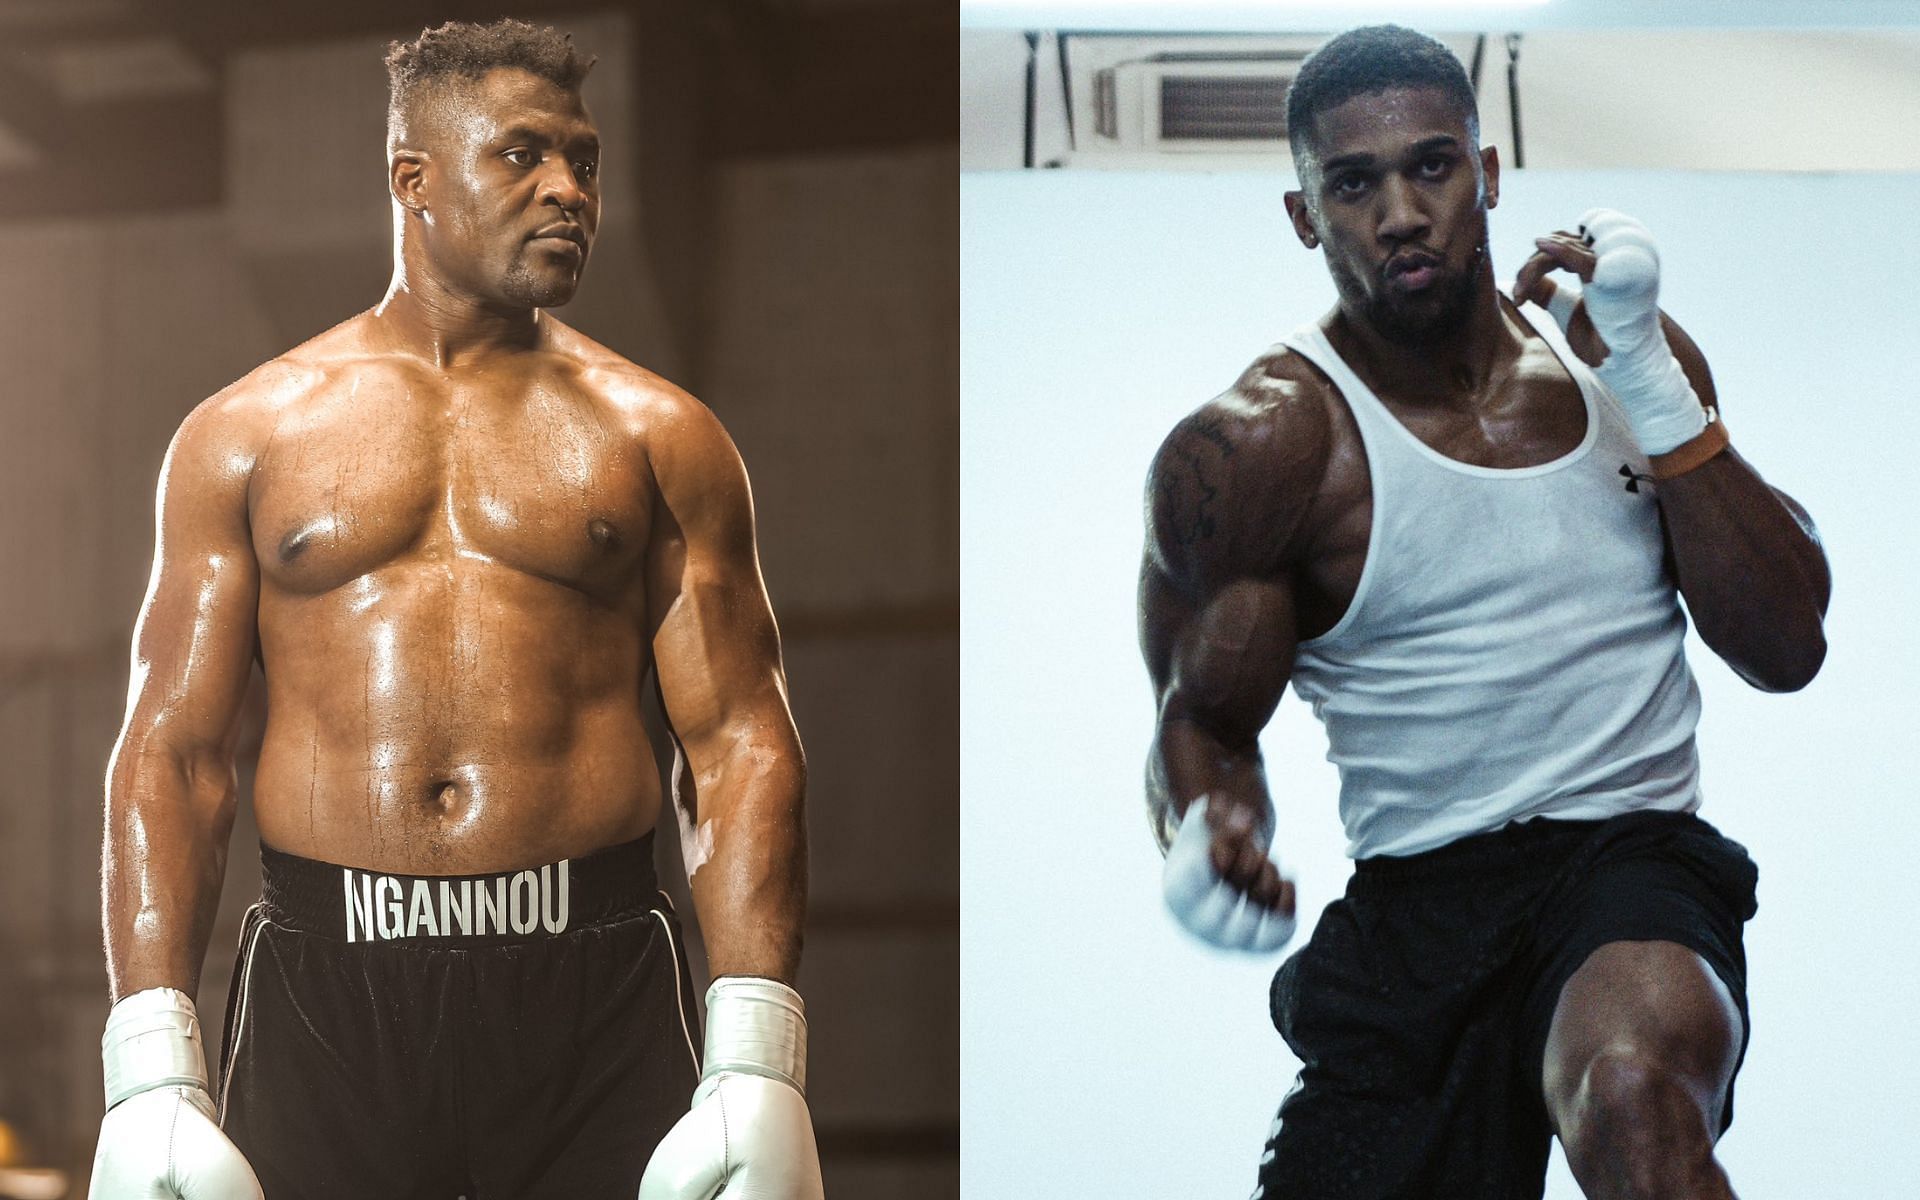 A big heavyweight showdown reportedly added to Anthony Joshua [Right] vs. Francis Ngannou [Left] card [Image courtesy: @francis_ngannou and @anthonyjoshua - X]